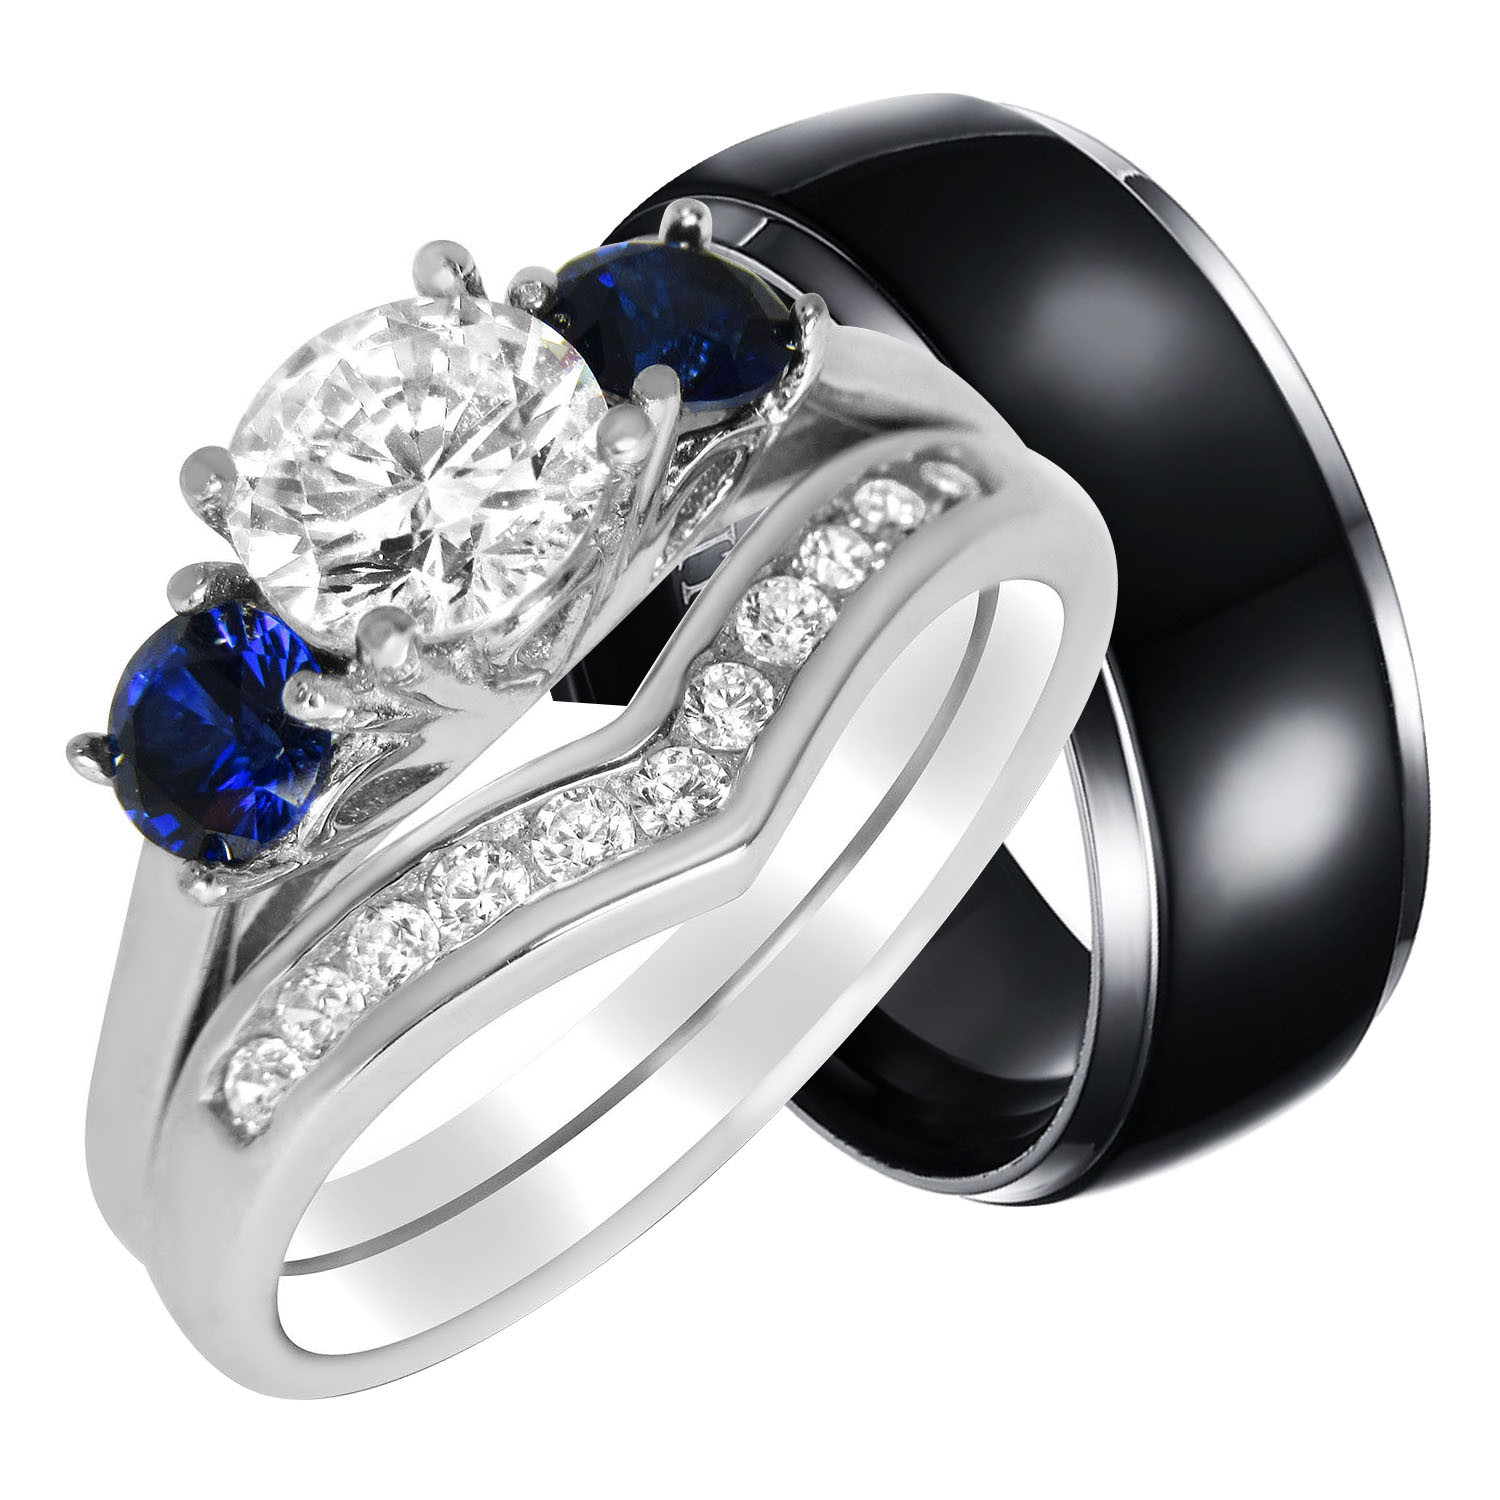 Wedding Ring Sets For Him And Her Cheap
 LaRaso & Co Wedding Ring Set for Him and Her Cheap His